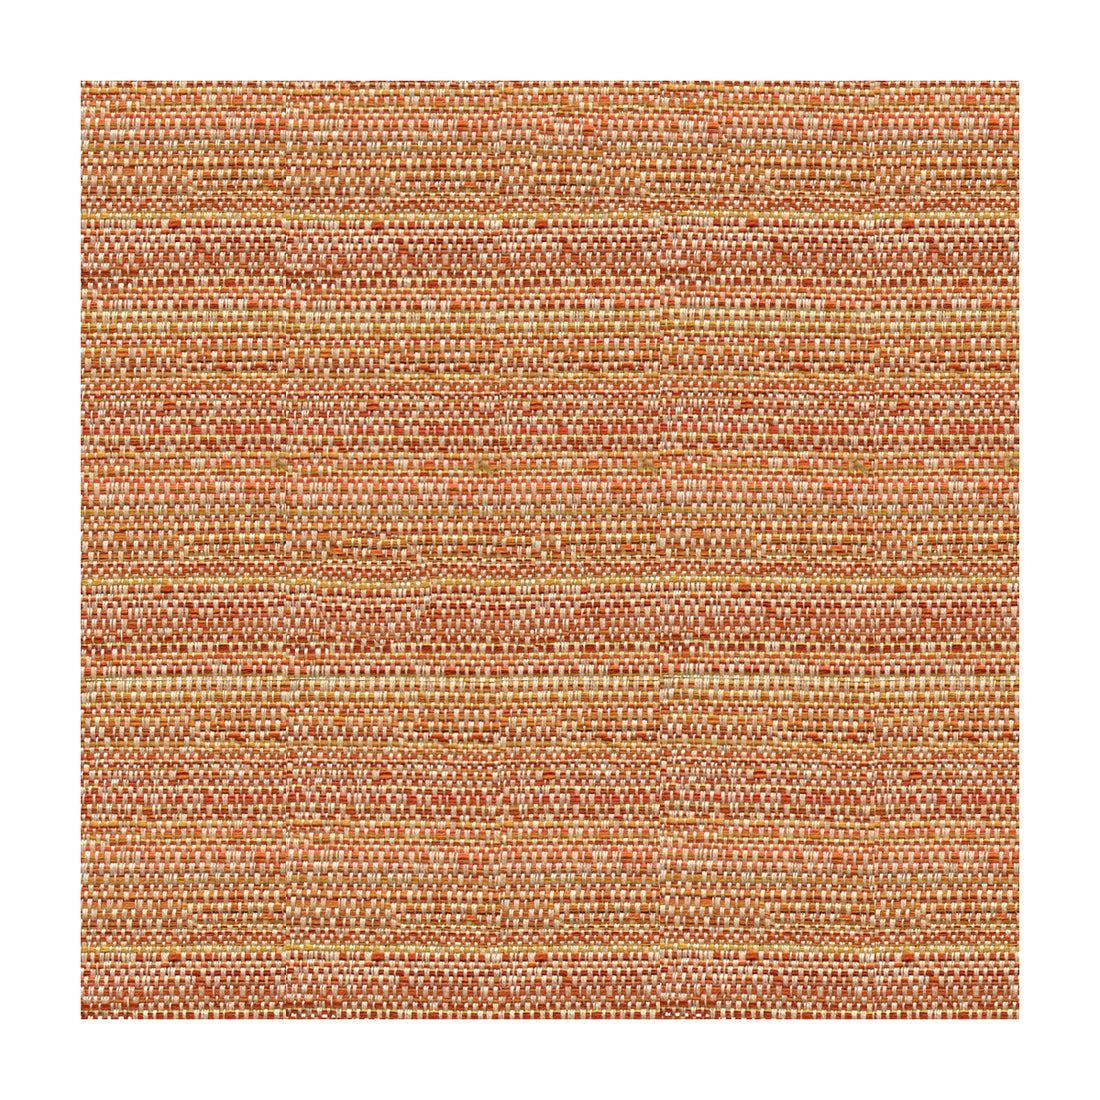 Kravet Couture fabric in 34274-12 color - pattern 34274.12.0 - by Kravet Couture in the Sunbrella collection